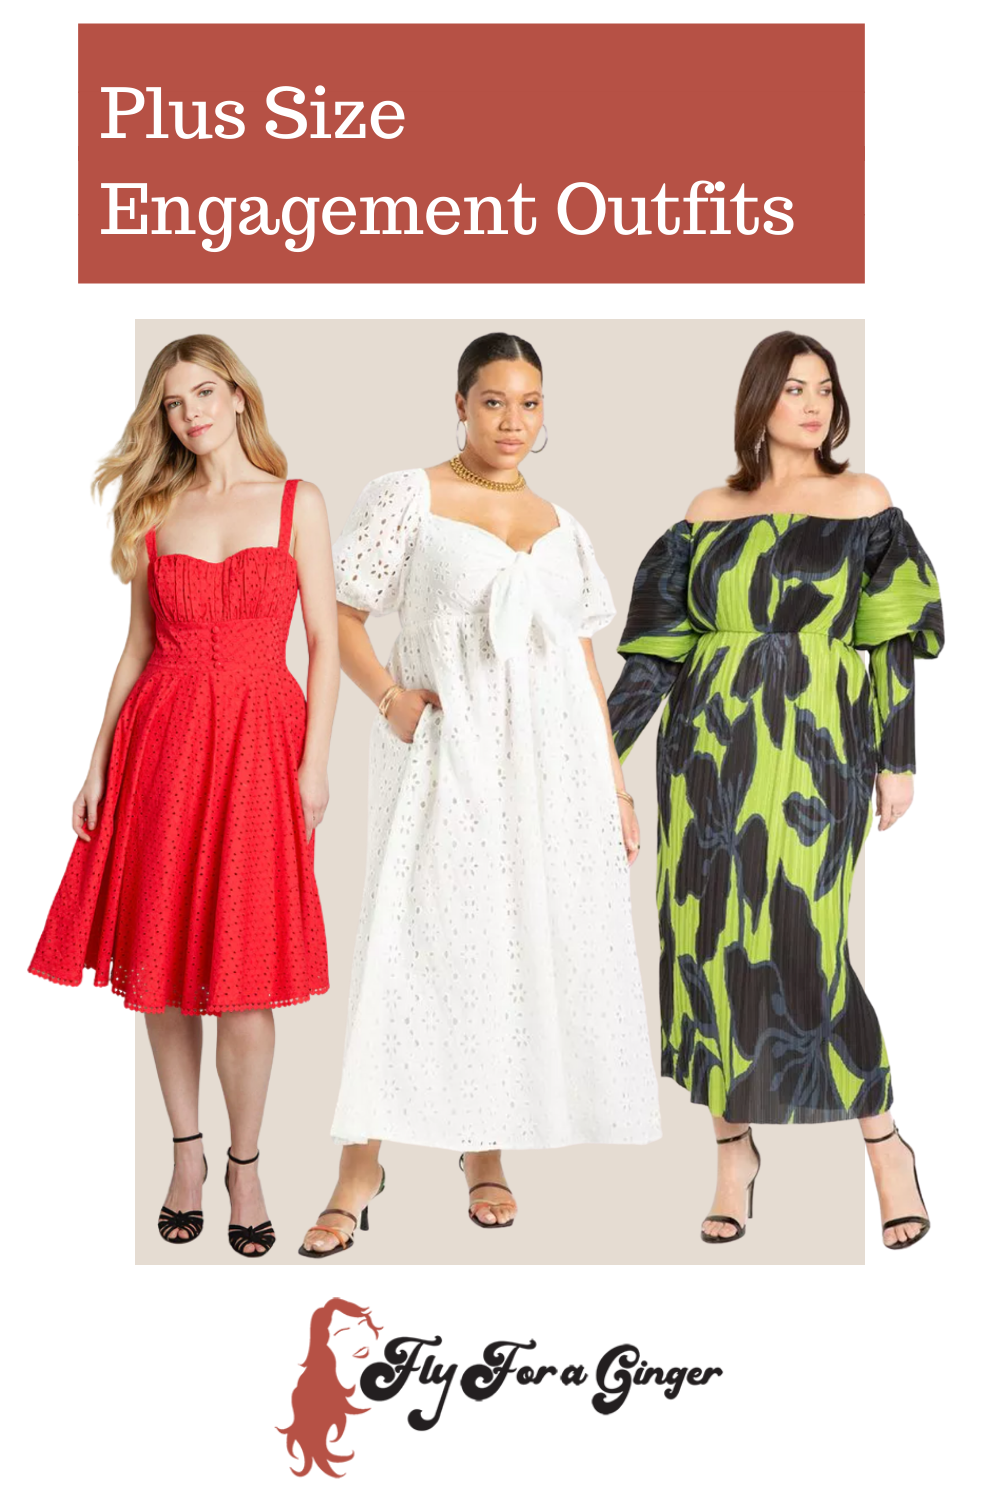 Plus Size Engagement Outfits // Engagement Outfits for Plus Size